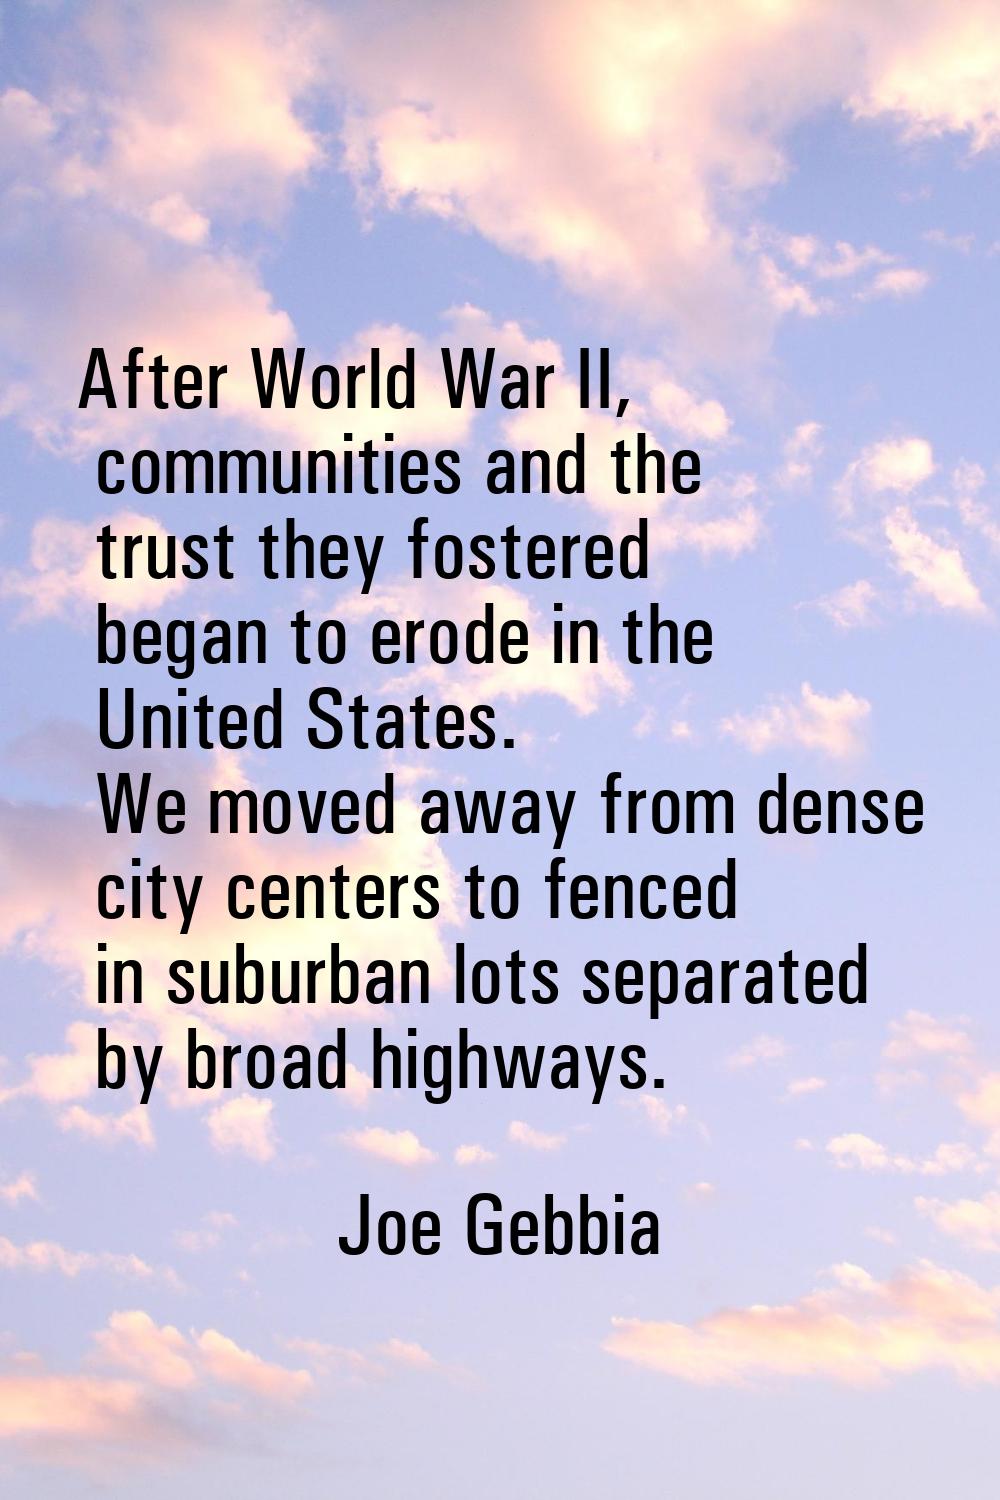 After World War II, communities and the trust they fostered began to erode in the United States. We